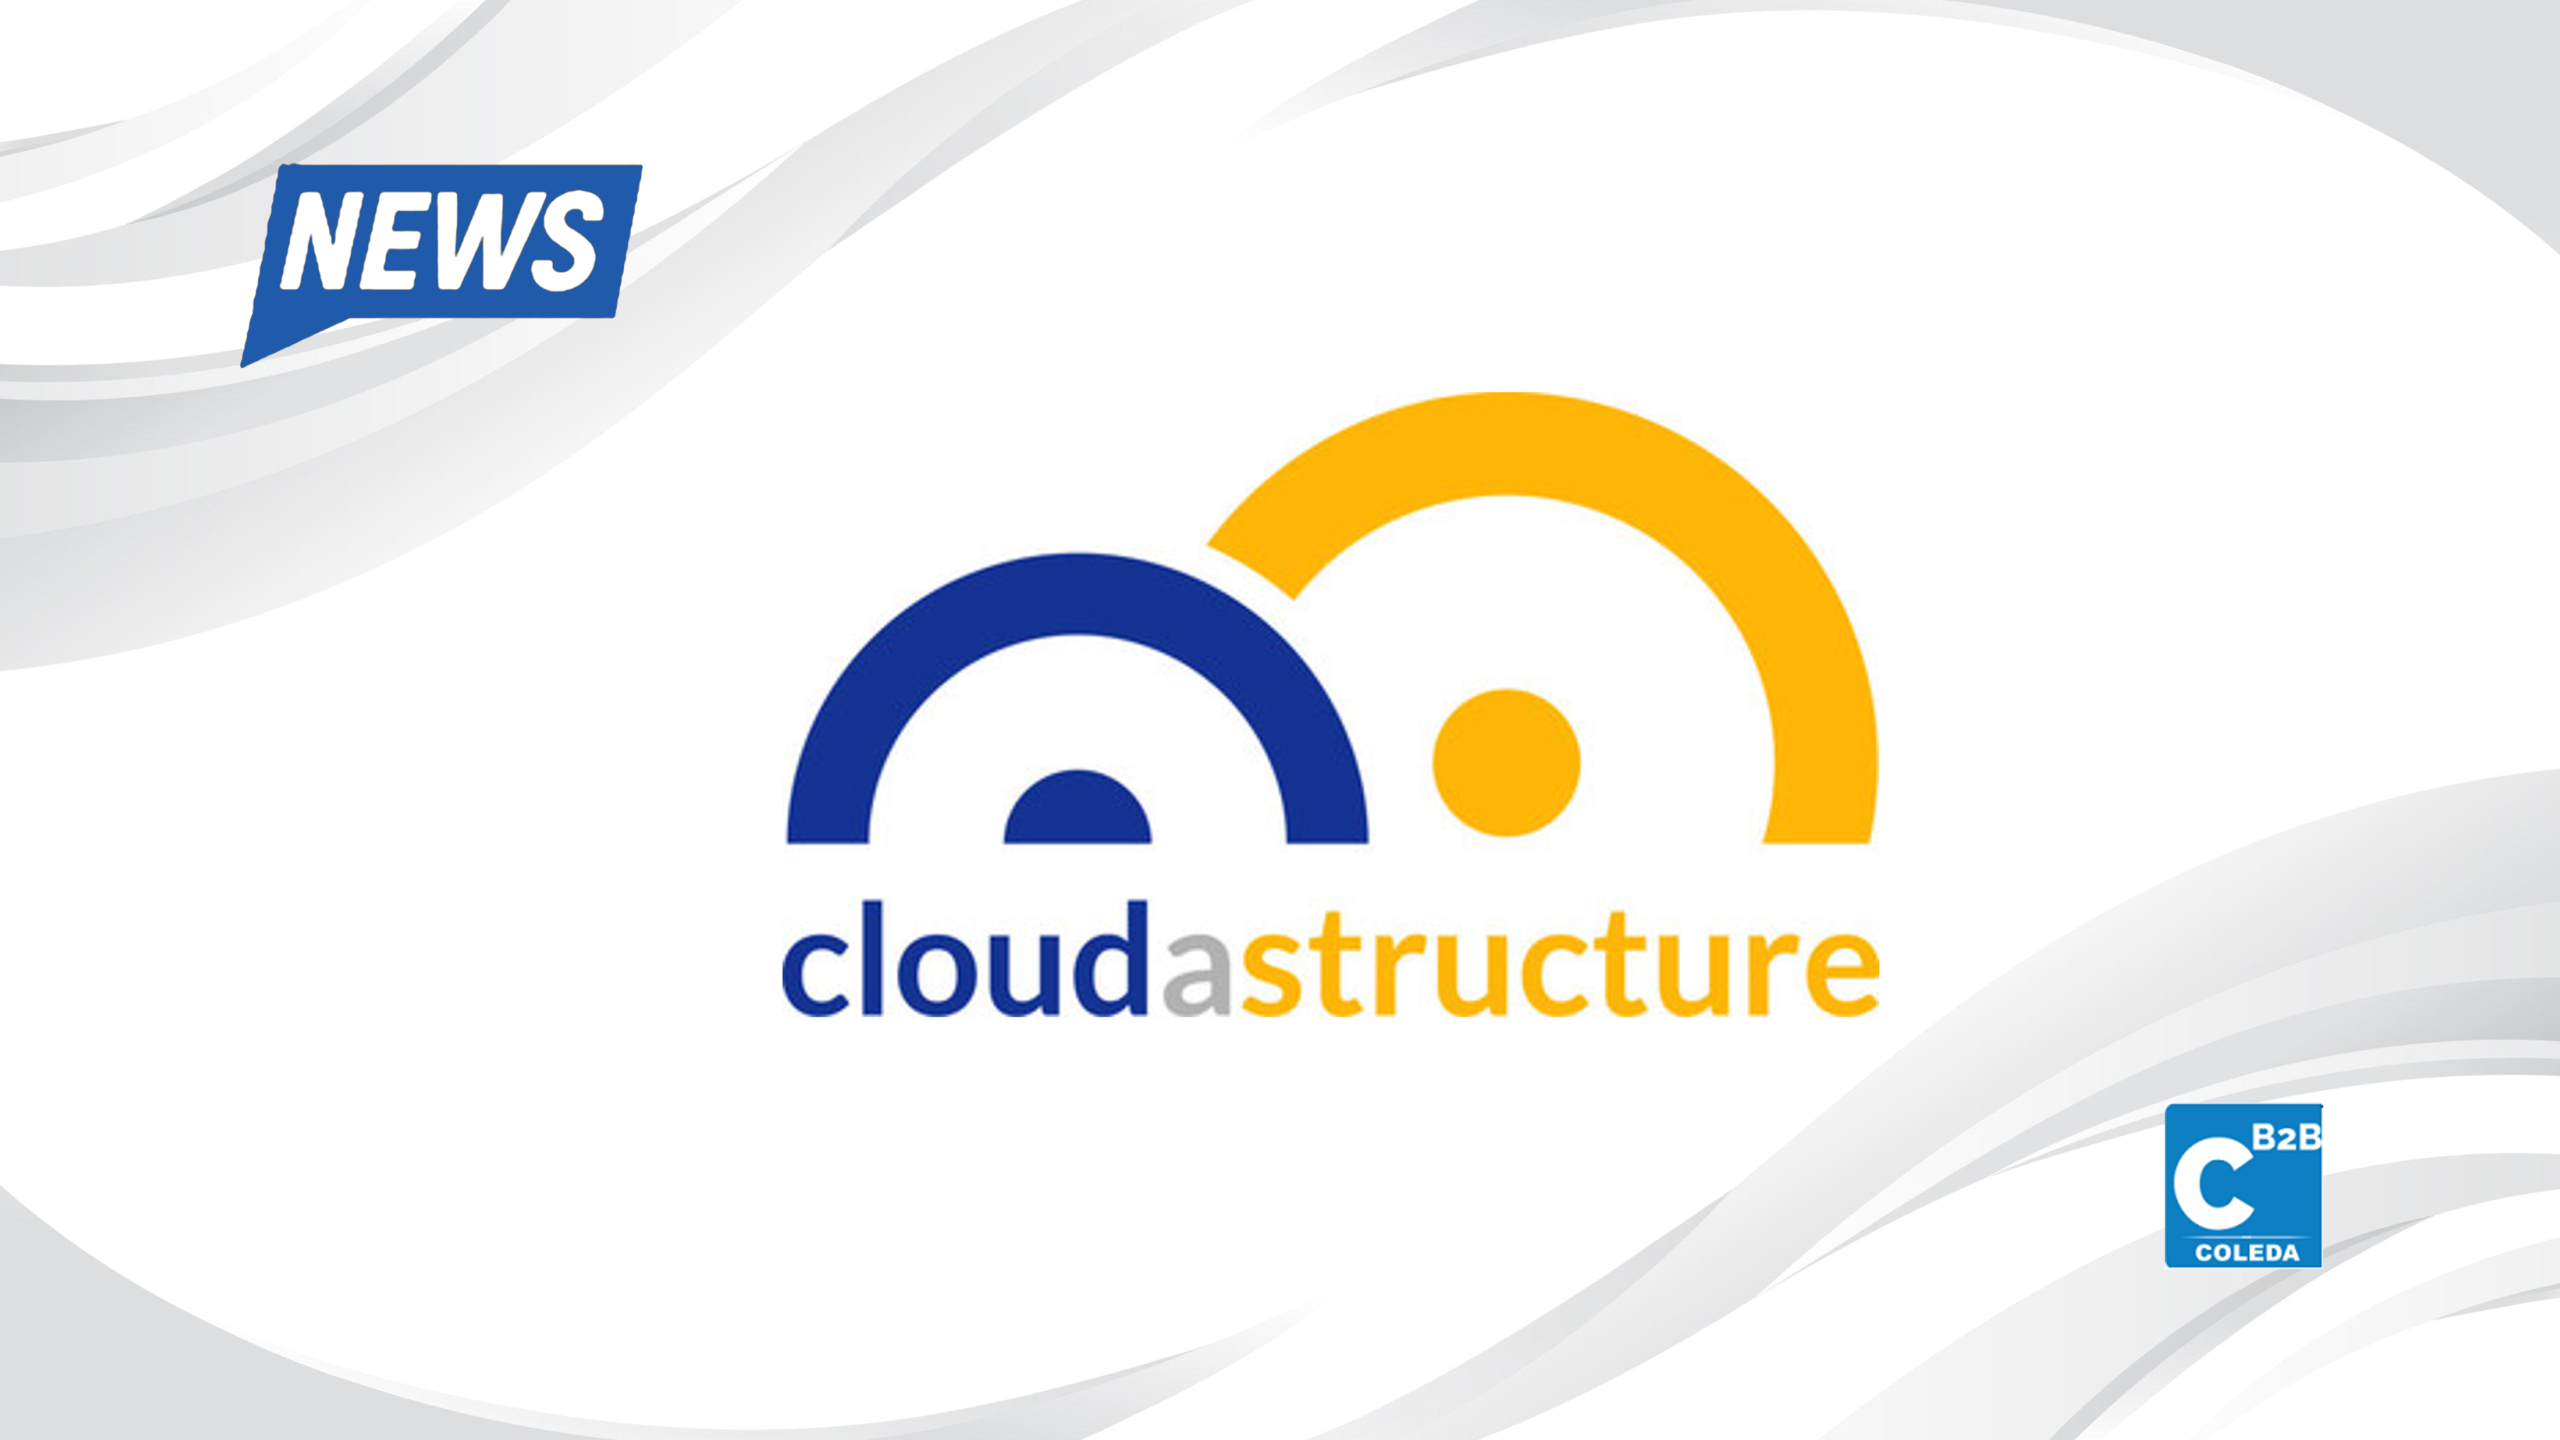 Cloudastructure is offering as an extra choice for business clients was just revealed.